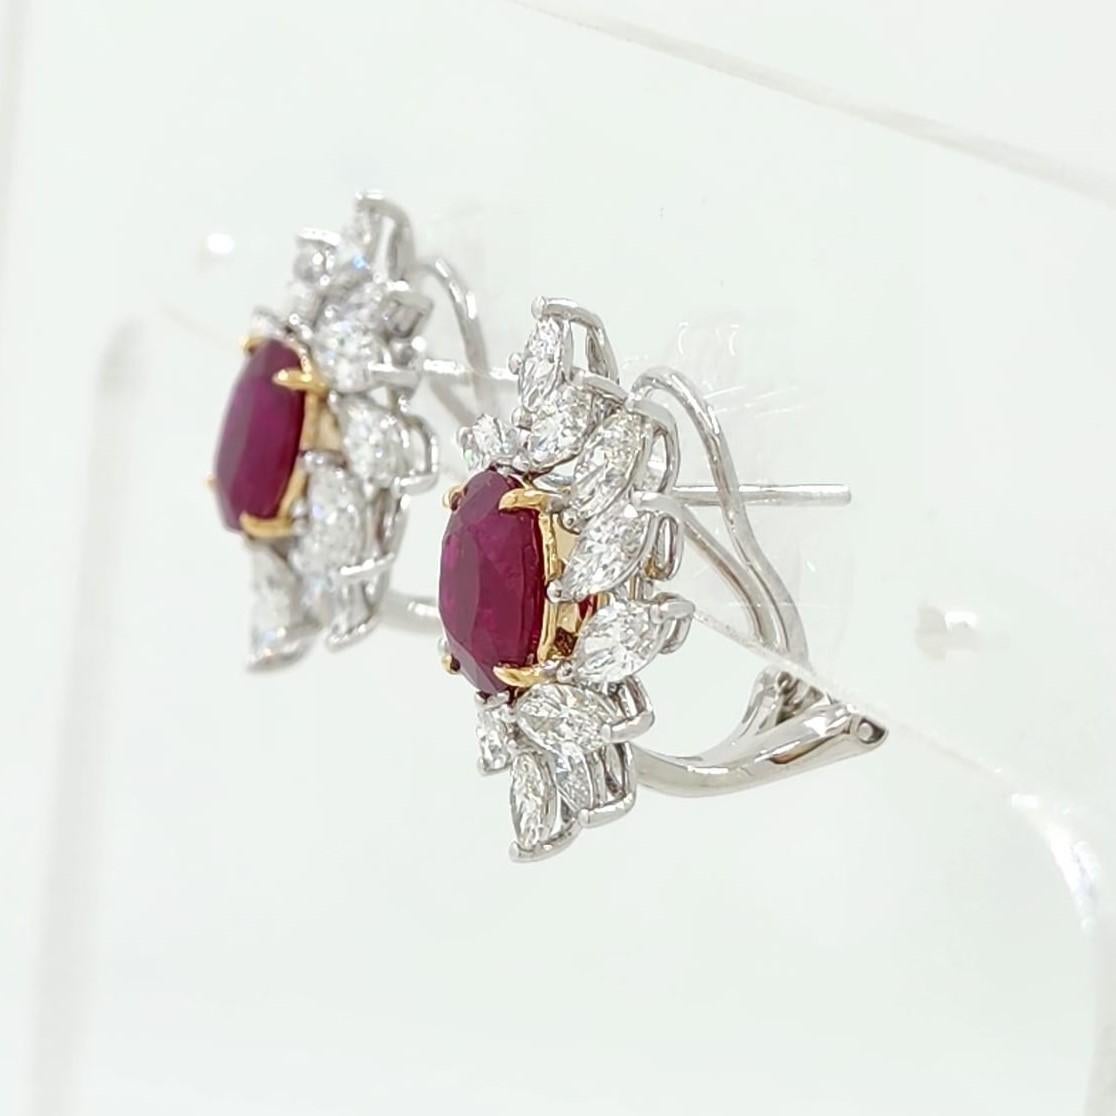 Contemporary GIA Certified 2.98 Carat Burma Ruby Diamond Earrings in 18K White Gold For Sale